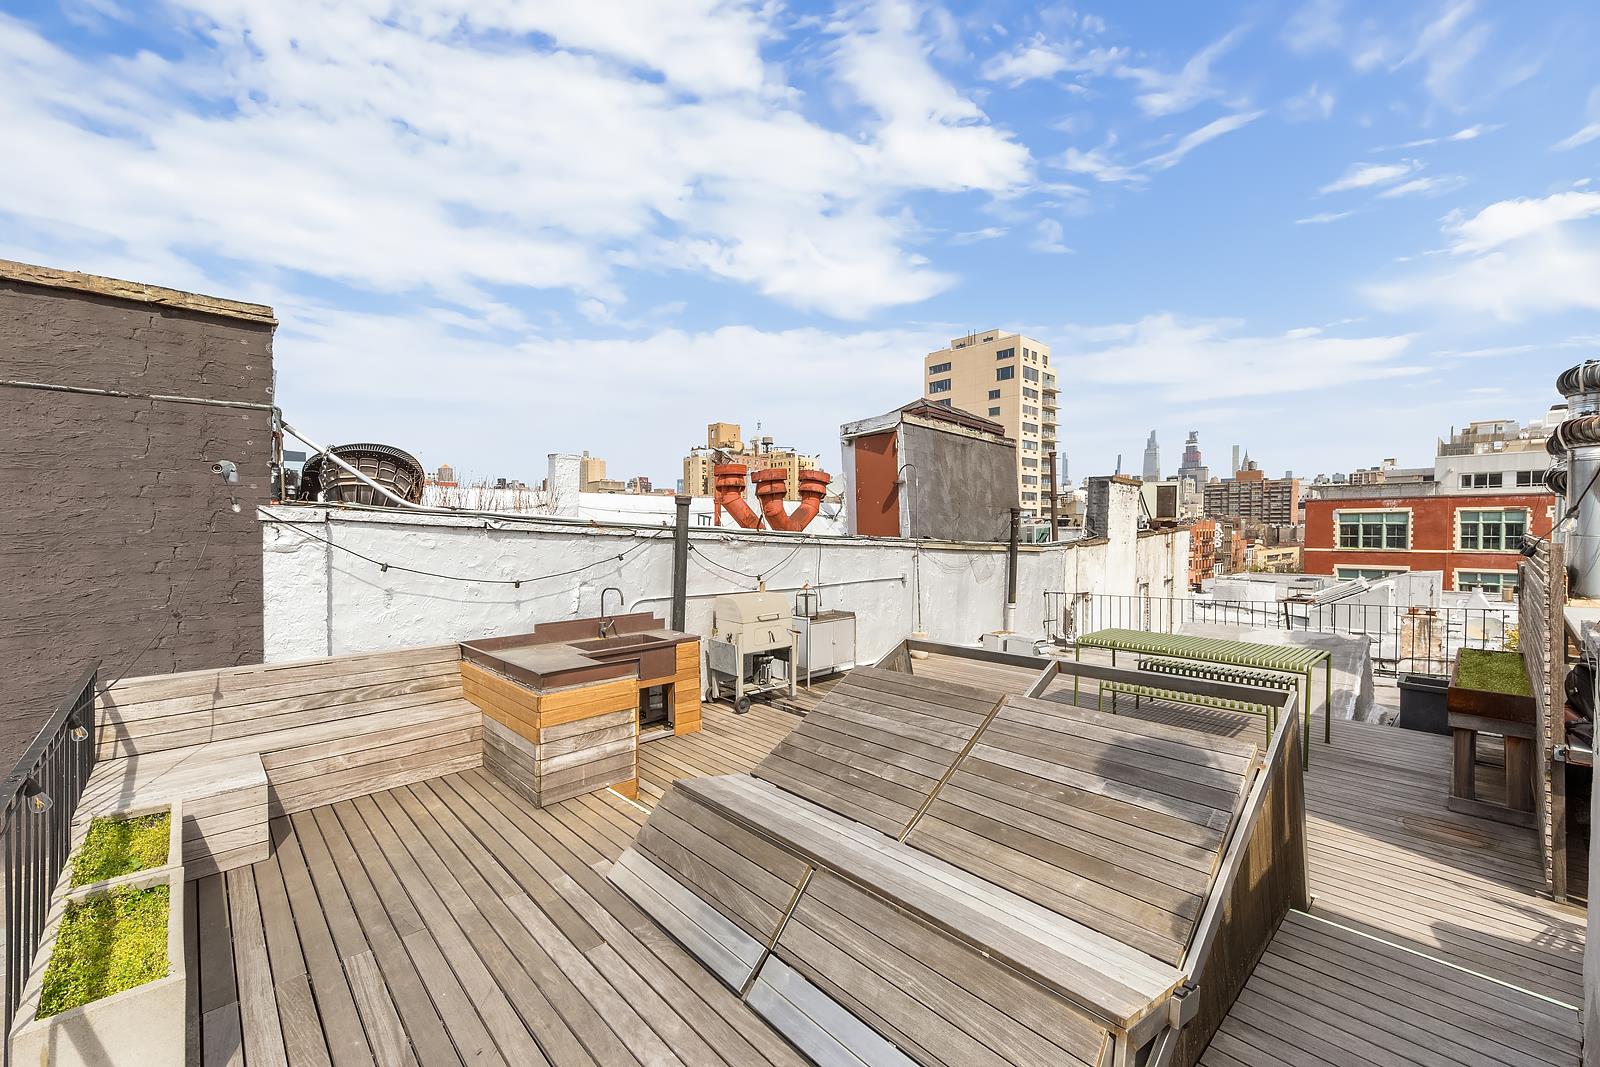 87 St Marks Place Pha, East Village, Downtown, NYC - 1 Bedrooms  
1 Bathrooms  
3 Rooms - 